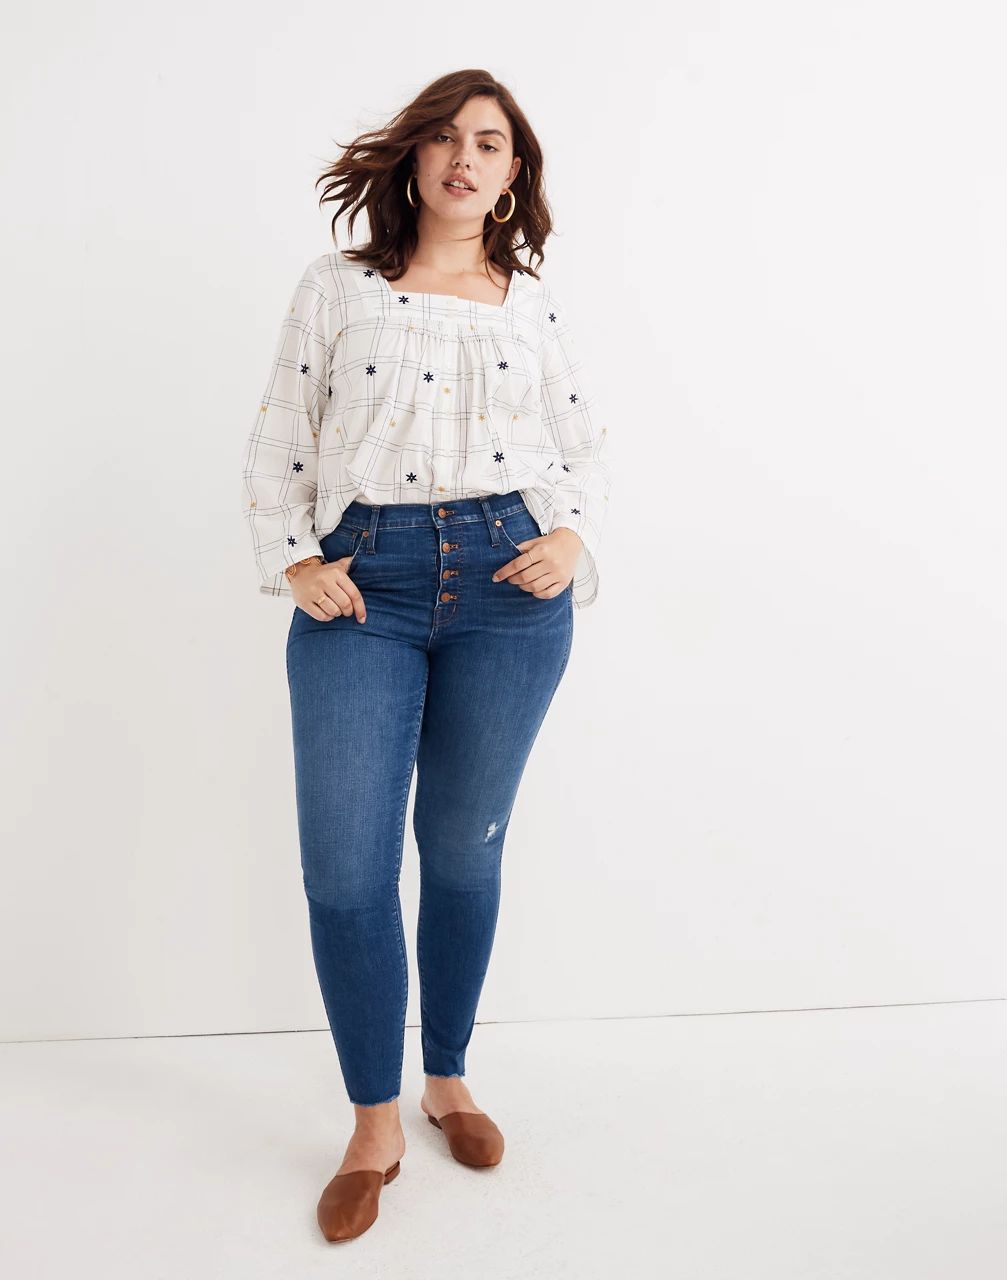 10" High-Rise Skinny Jeans in Hanna Wash | Madewell